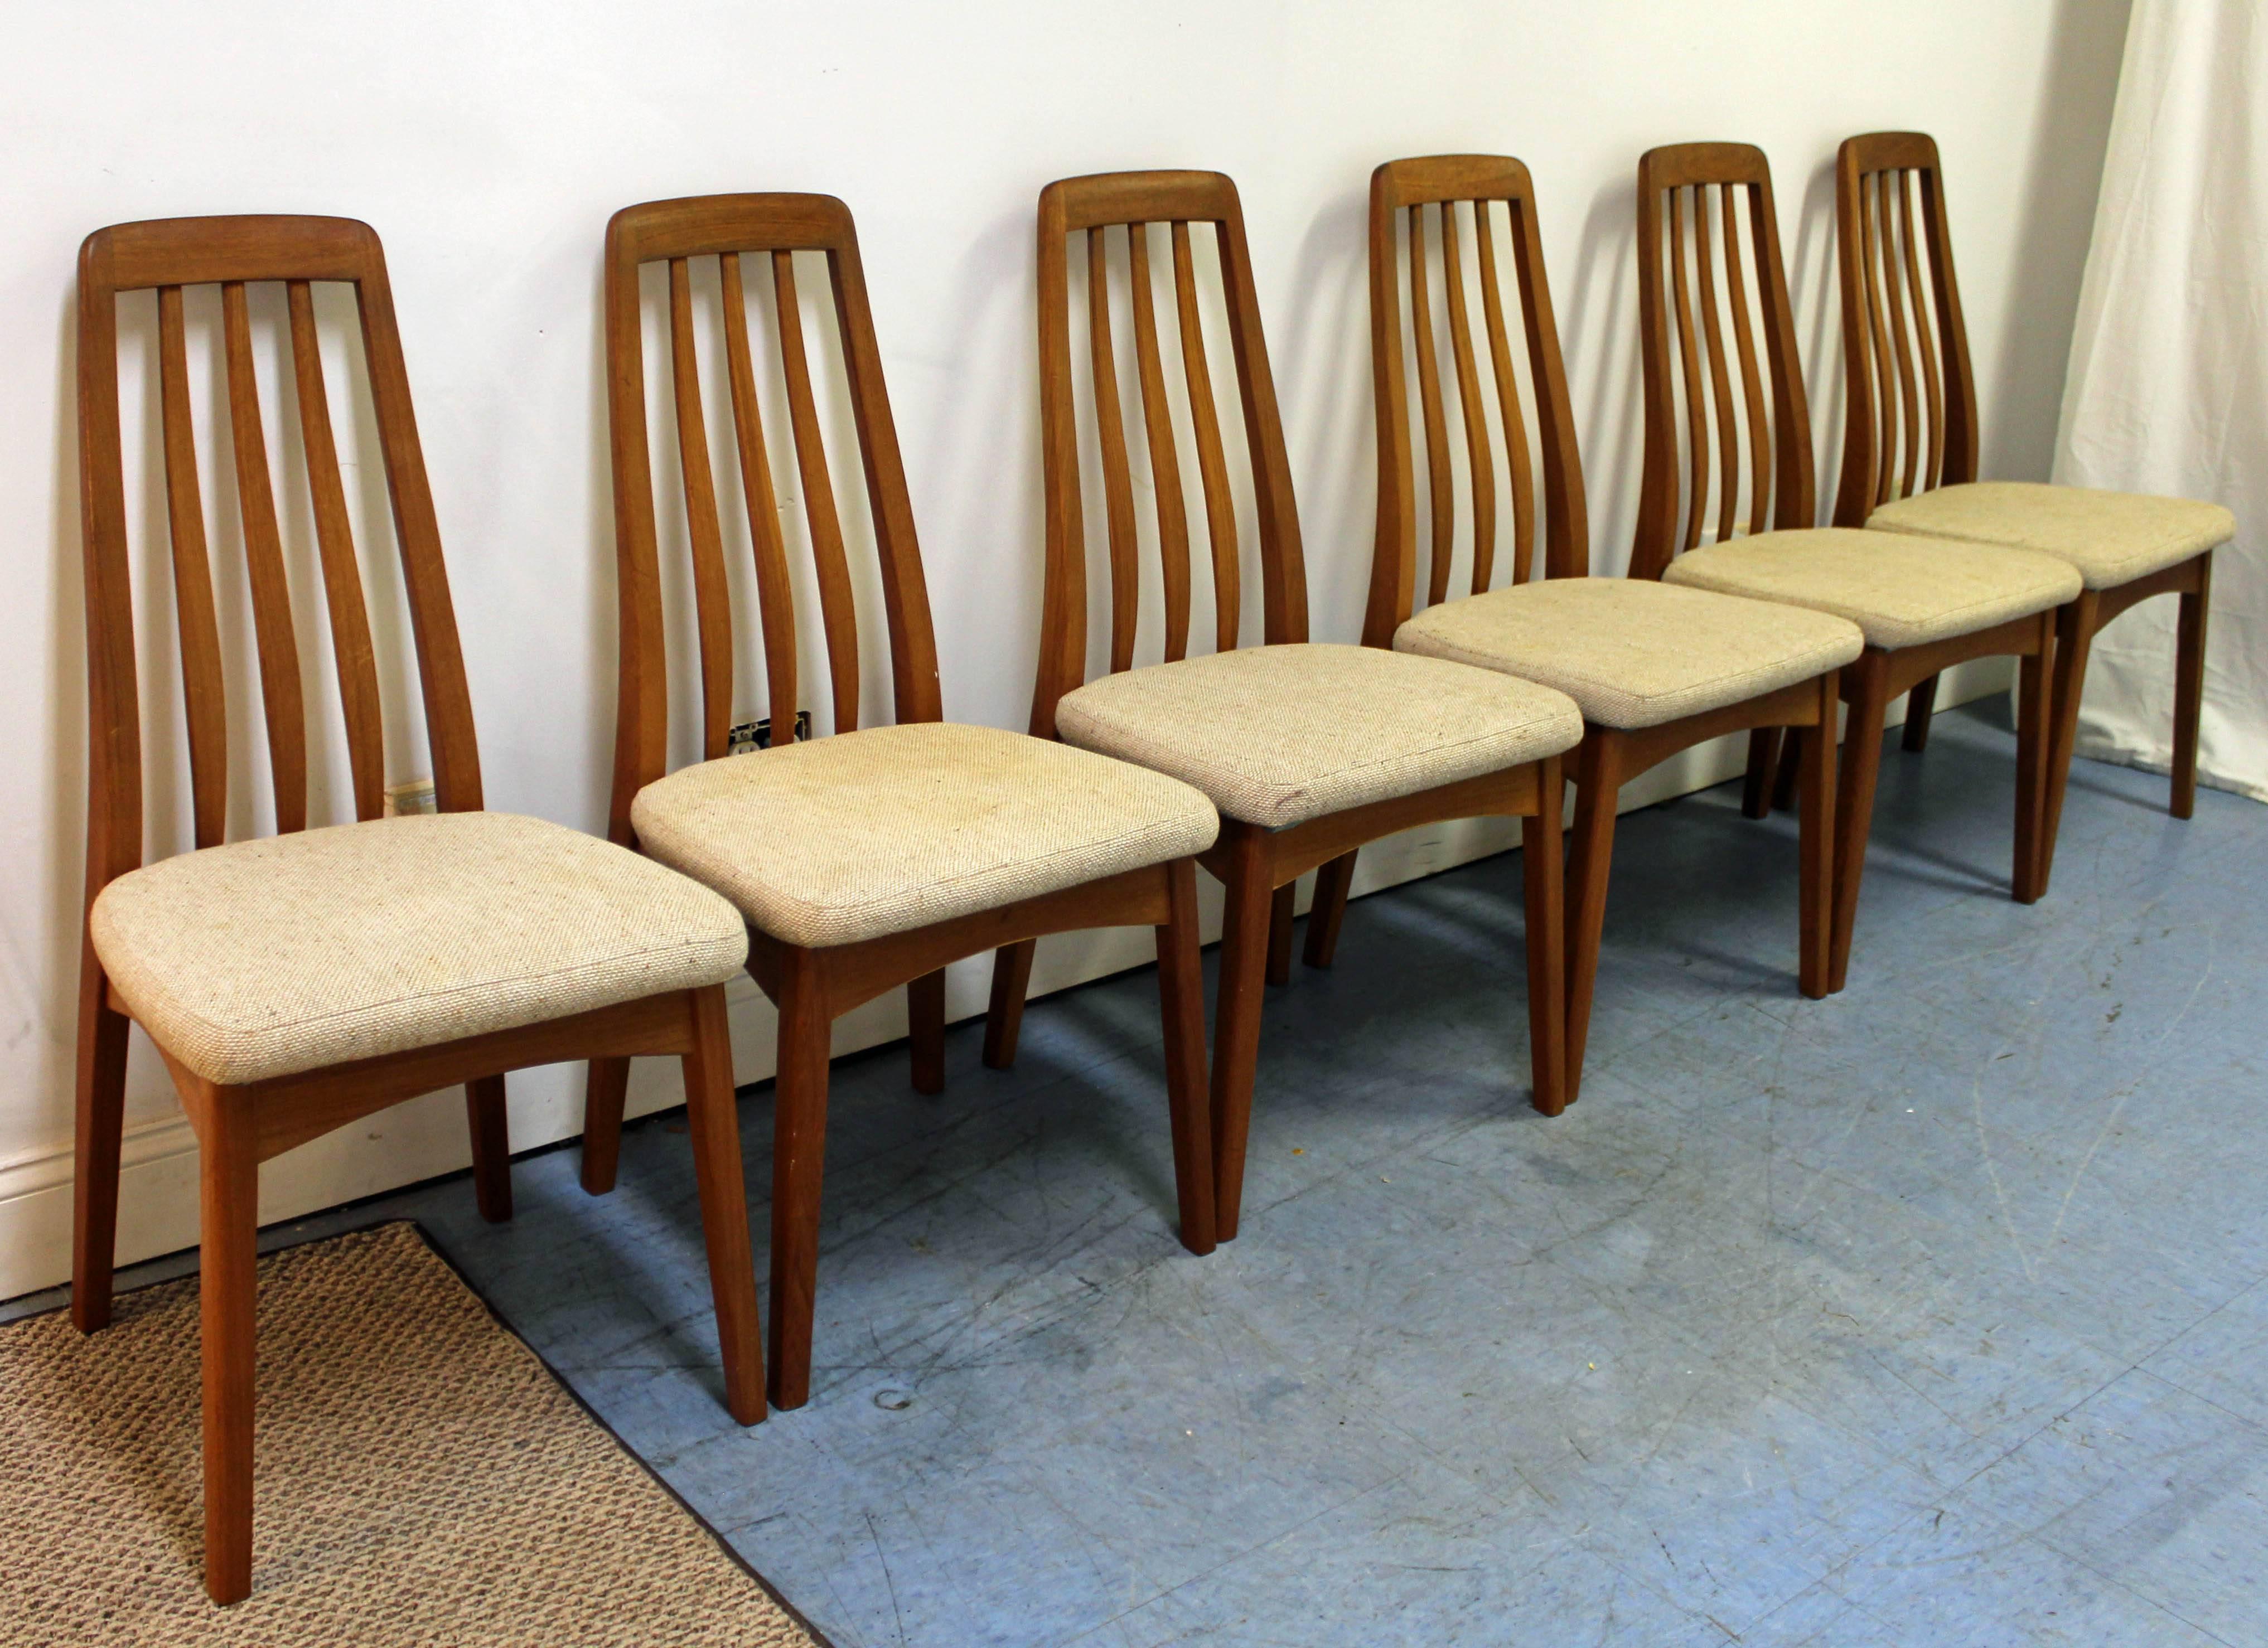 Offered is a set of six Danish modern teak dining chairs. Includes six side chairs with spindle-backs. The chairs are very sturdy. They are not signed. 

Dimensions: 
18